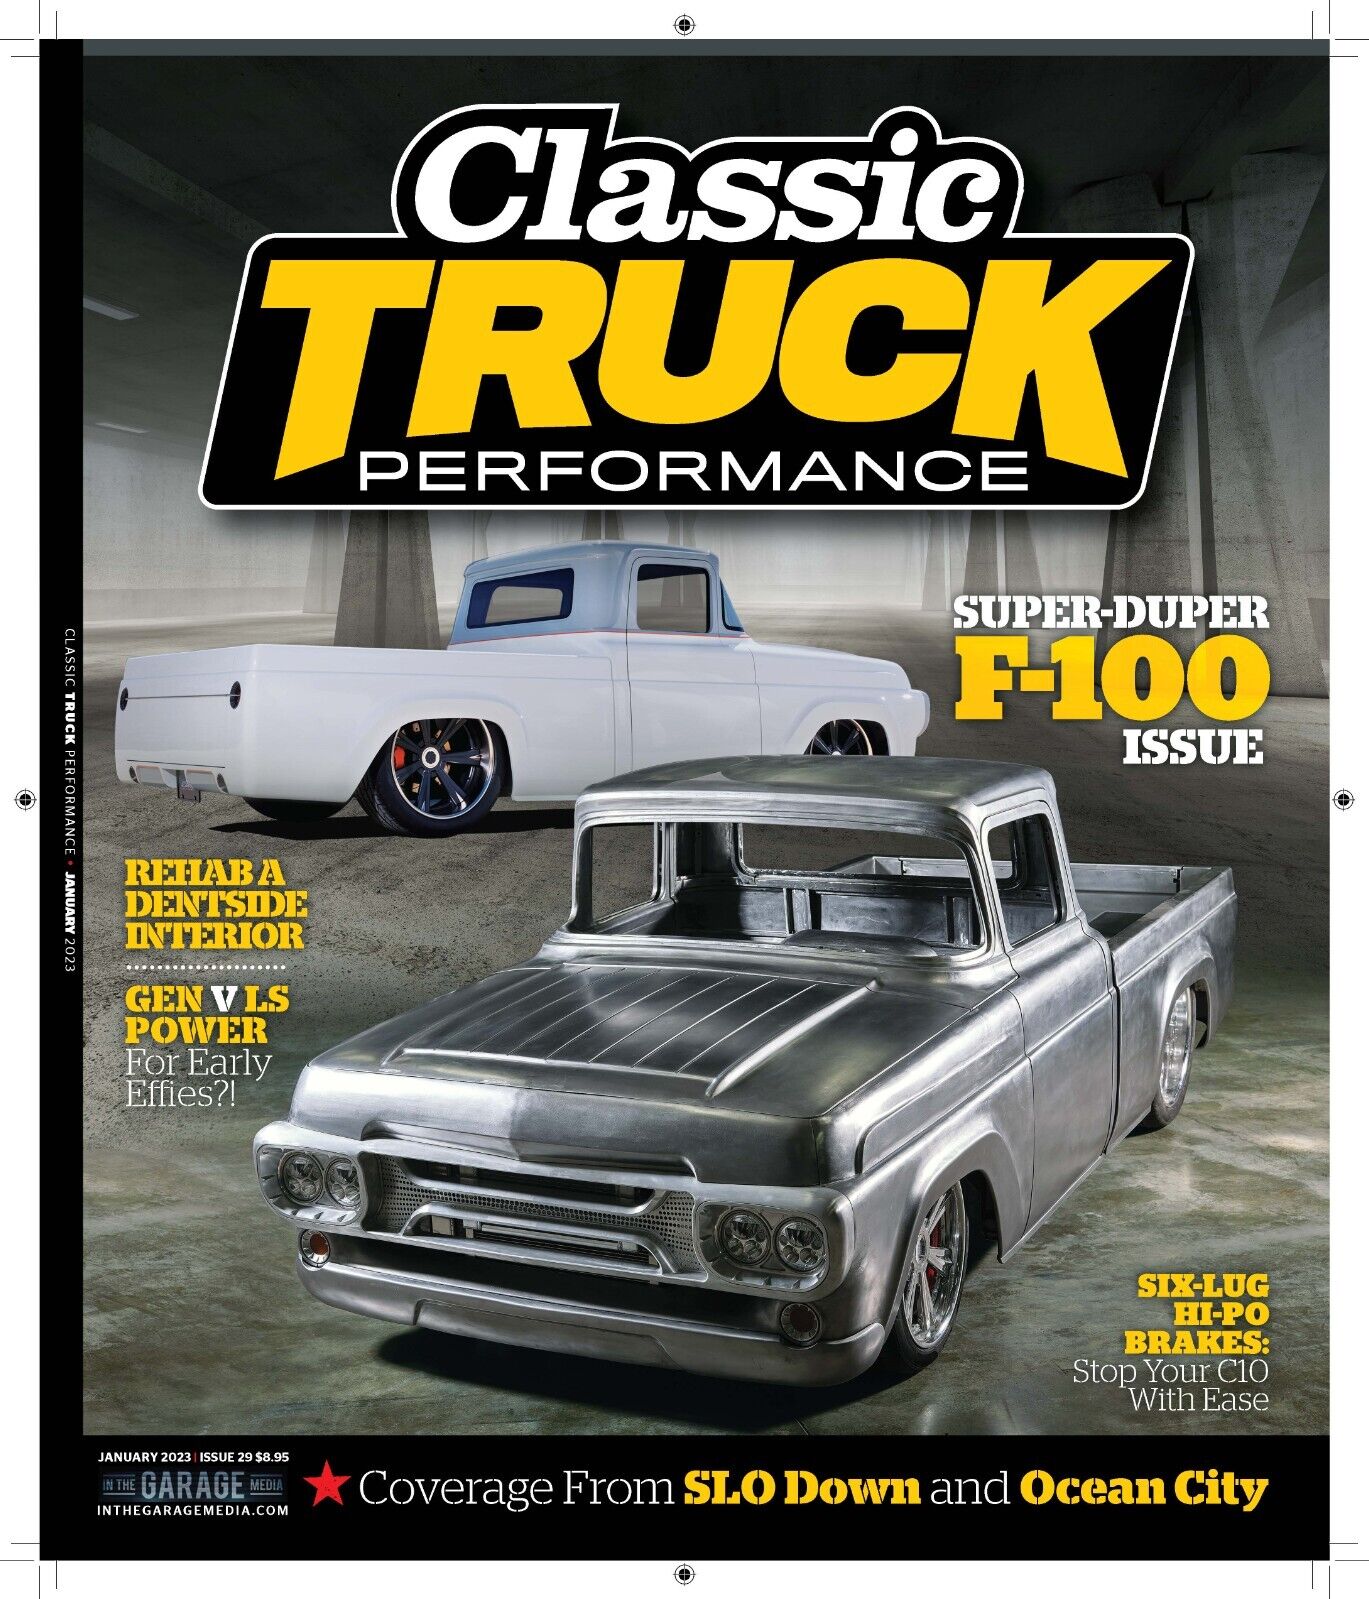 Classic Truck Performance Magazine 1 Year Subscription (12 issues) Brand New